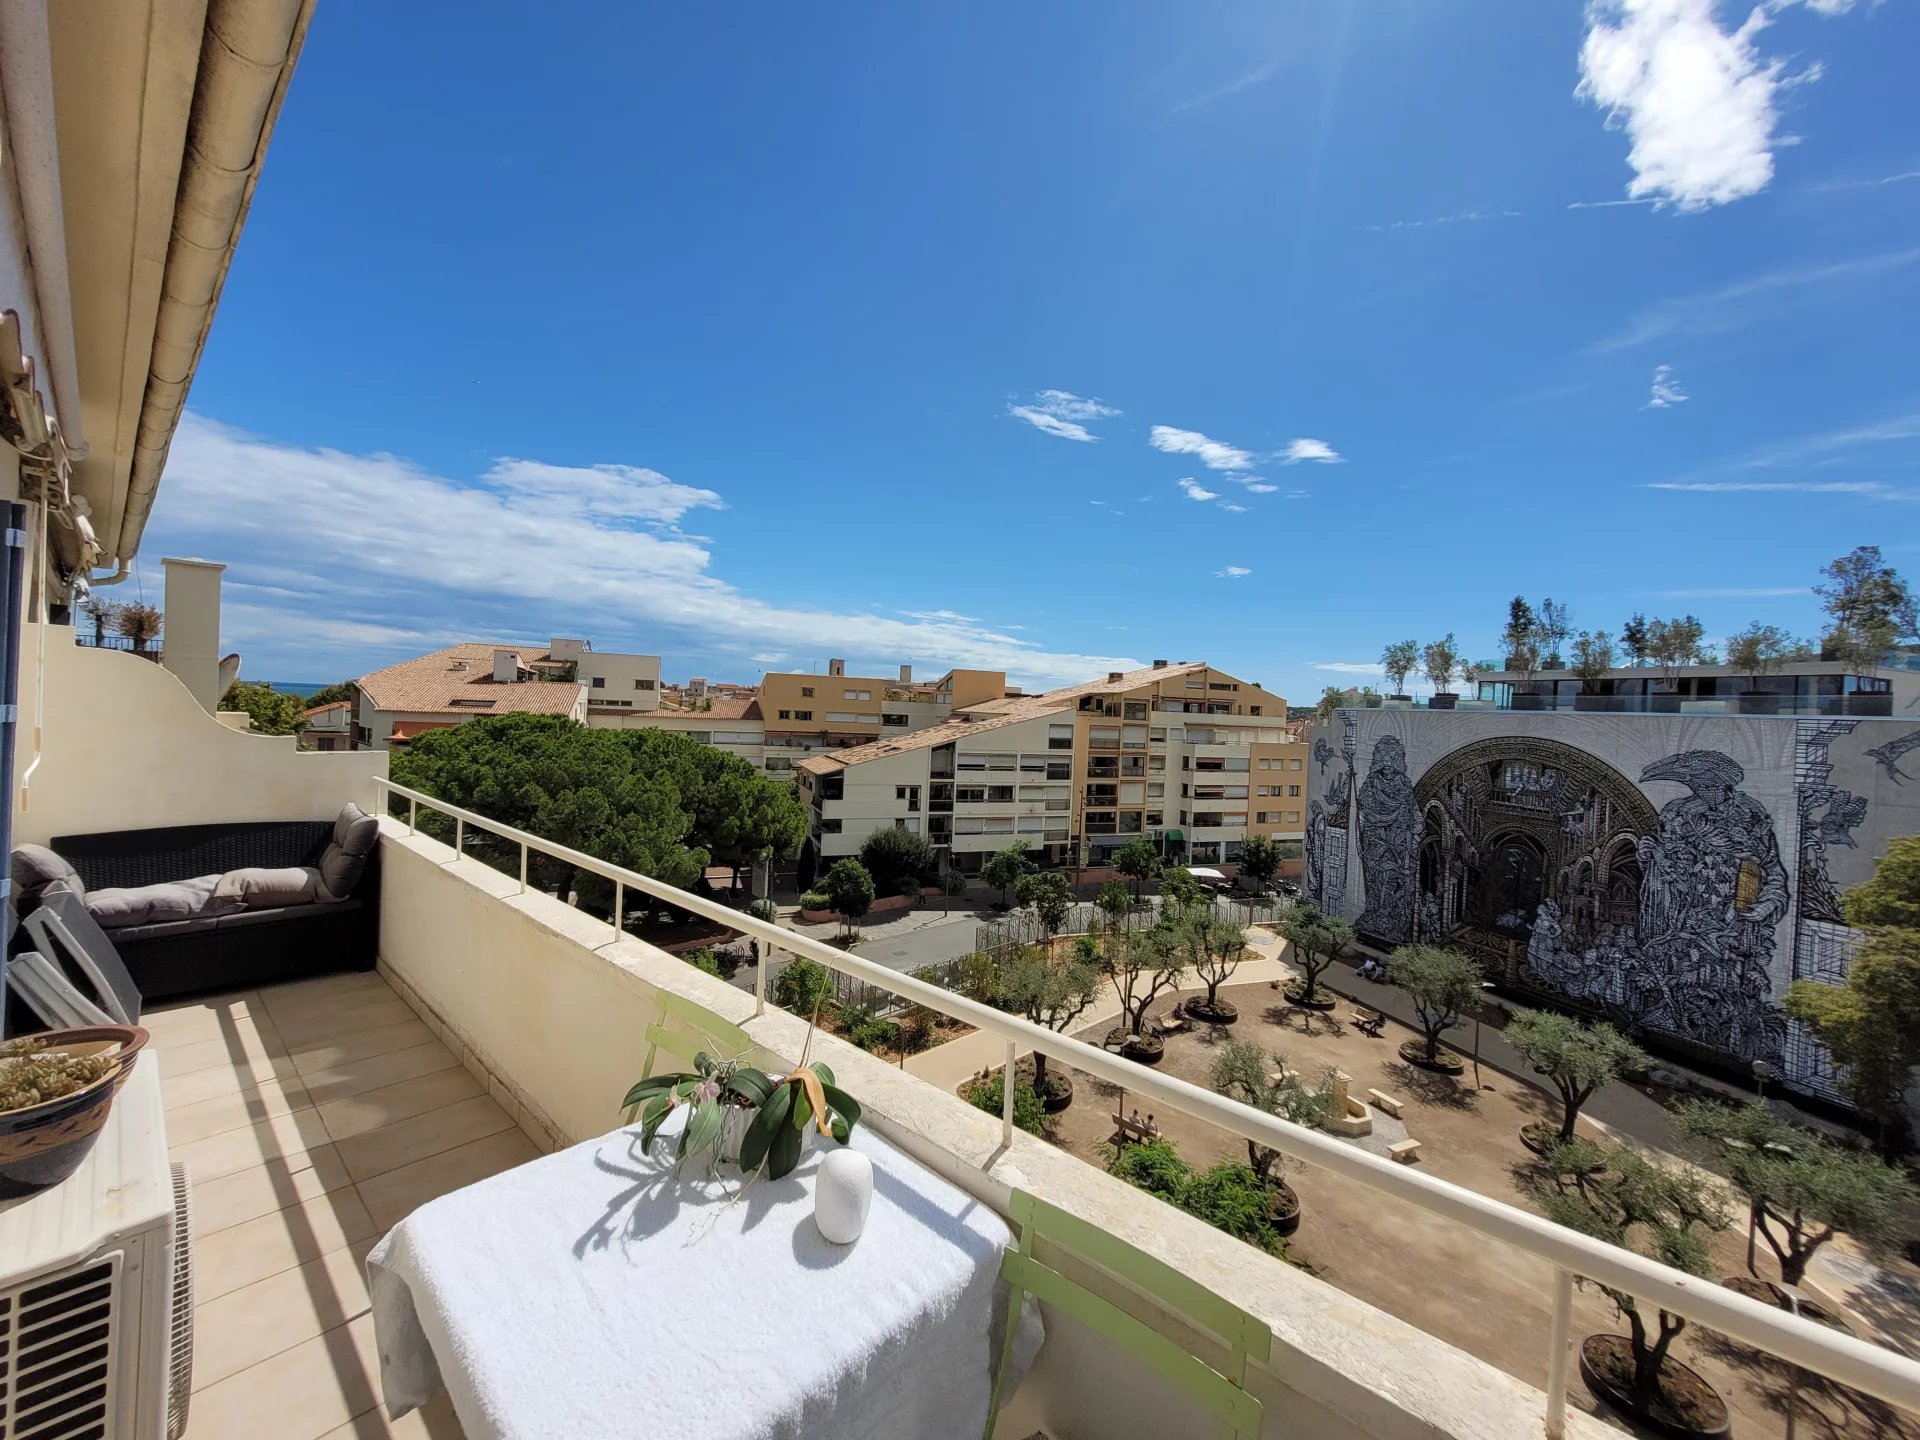 Old town Antibes 2 bed 45m2 Port top-Floor stunning views